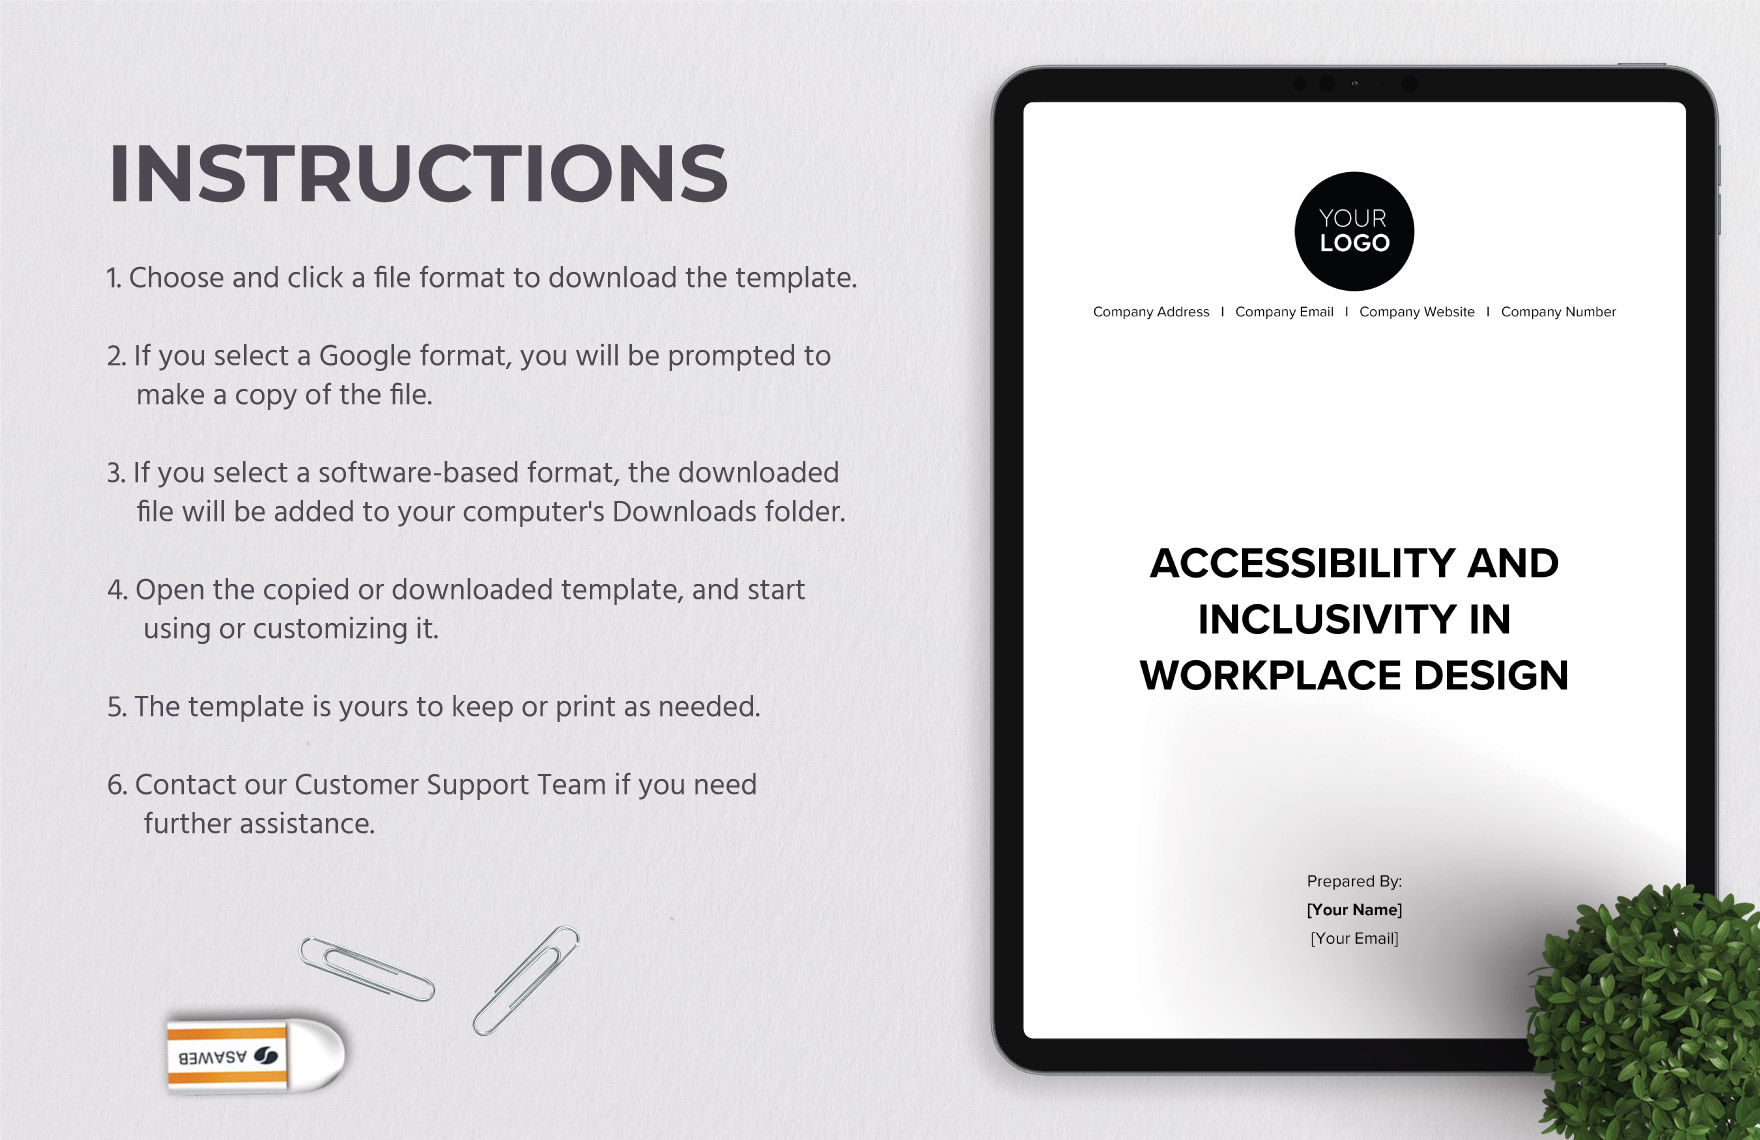 Accessibility and Inclusivity in Workplace Design HR Template